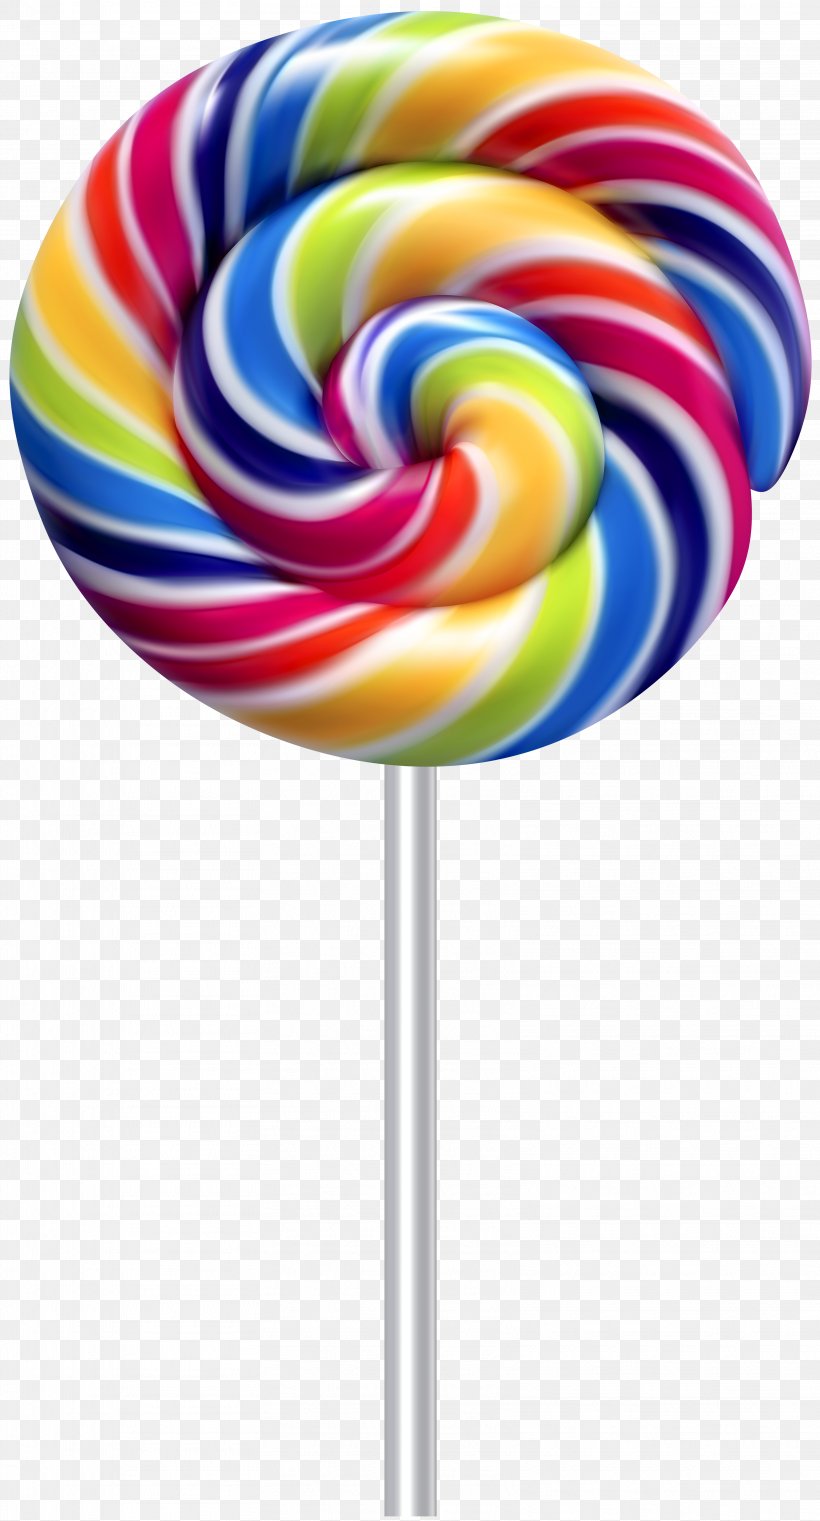 Lollipop Stick Candy Clip Art, PNG, 3234x6000px, Lollipop, Candy, Candy Cane, Confectionery, Food Download Free